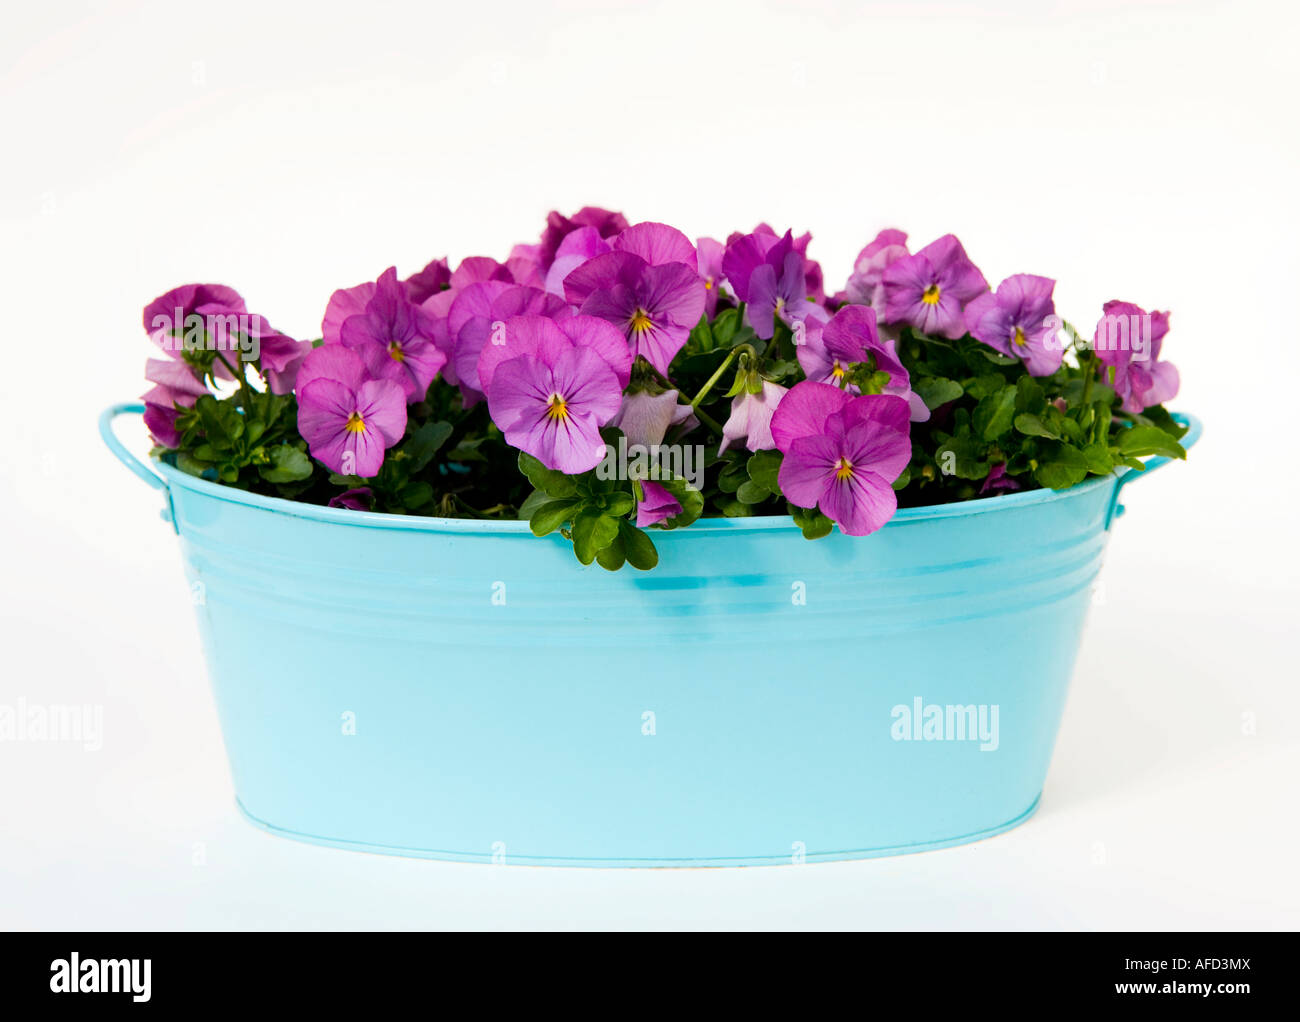 Pansies potted up in a blue metal container Stock Photo